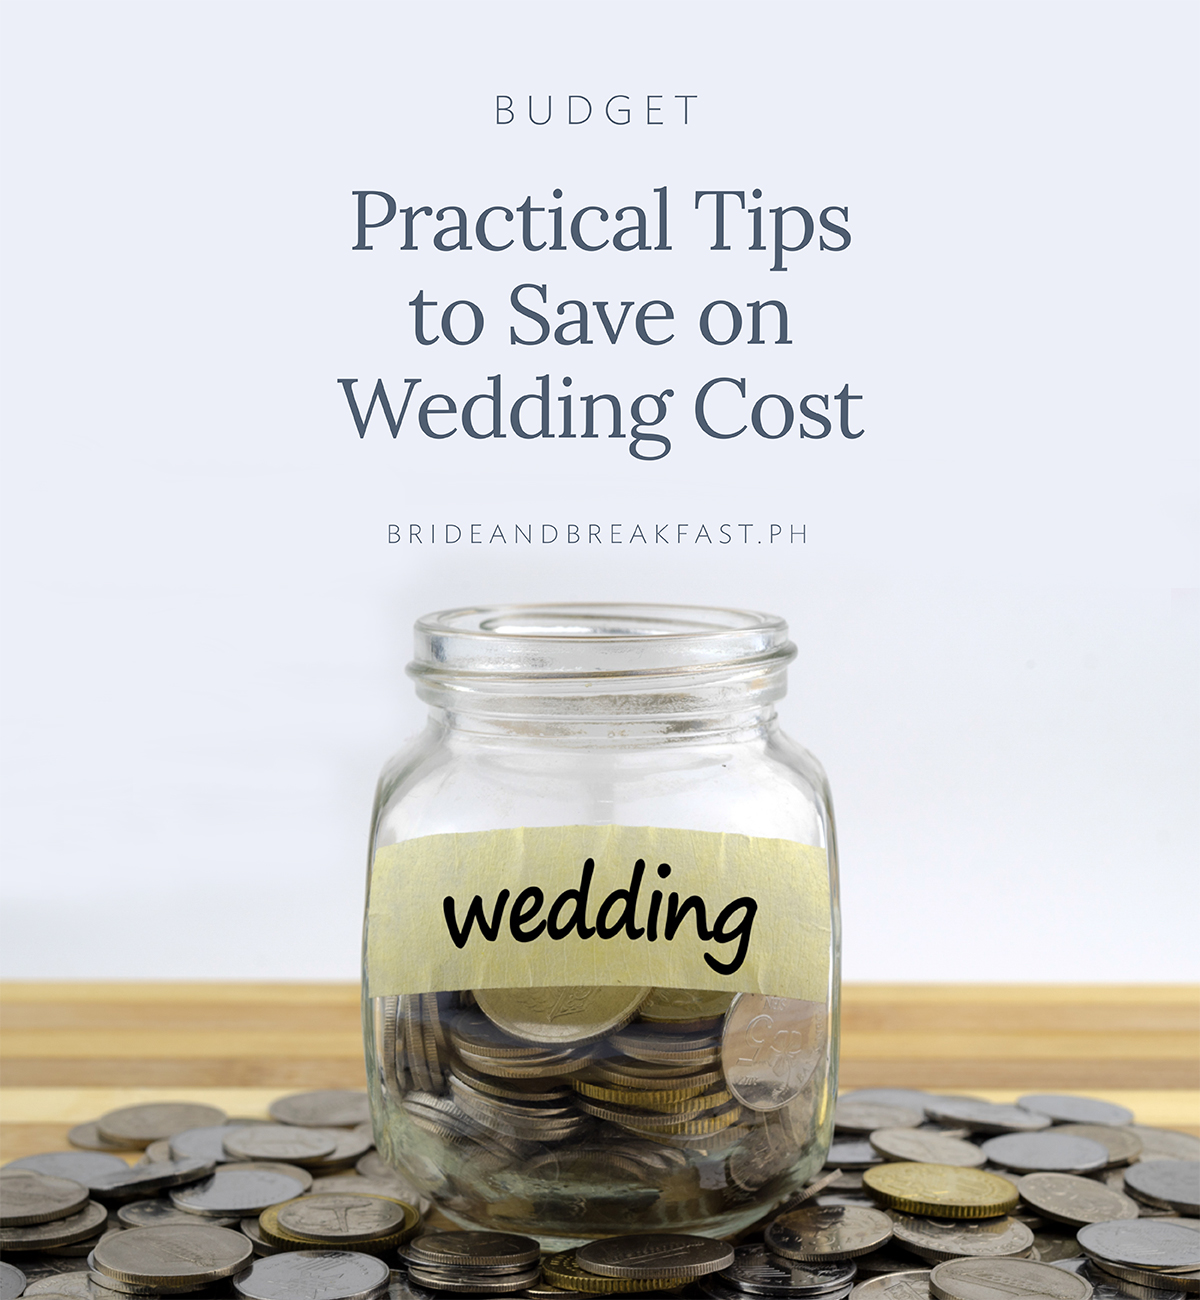 9 Practical Tips to Save on Wedding Cost